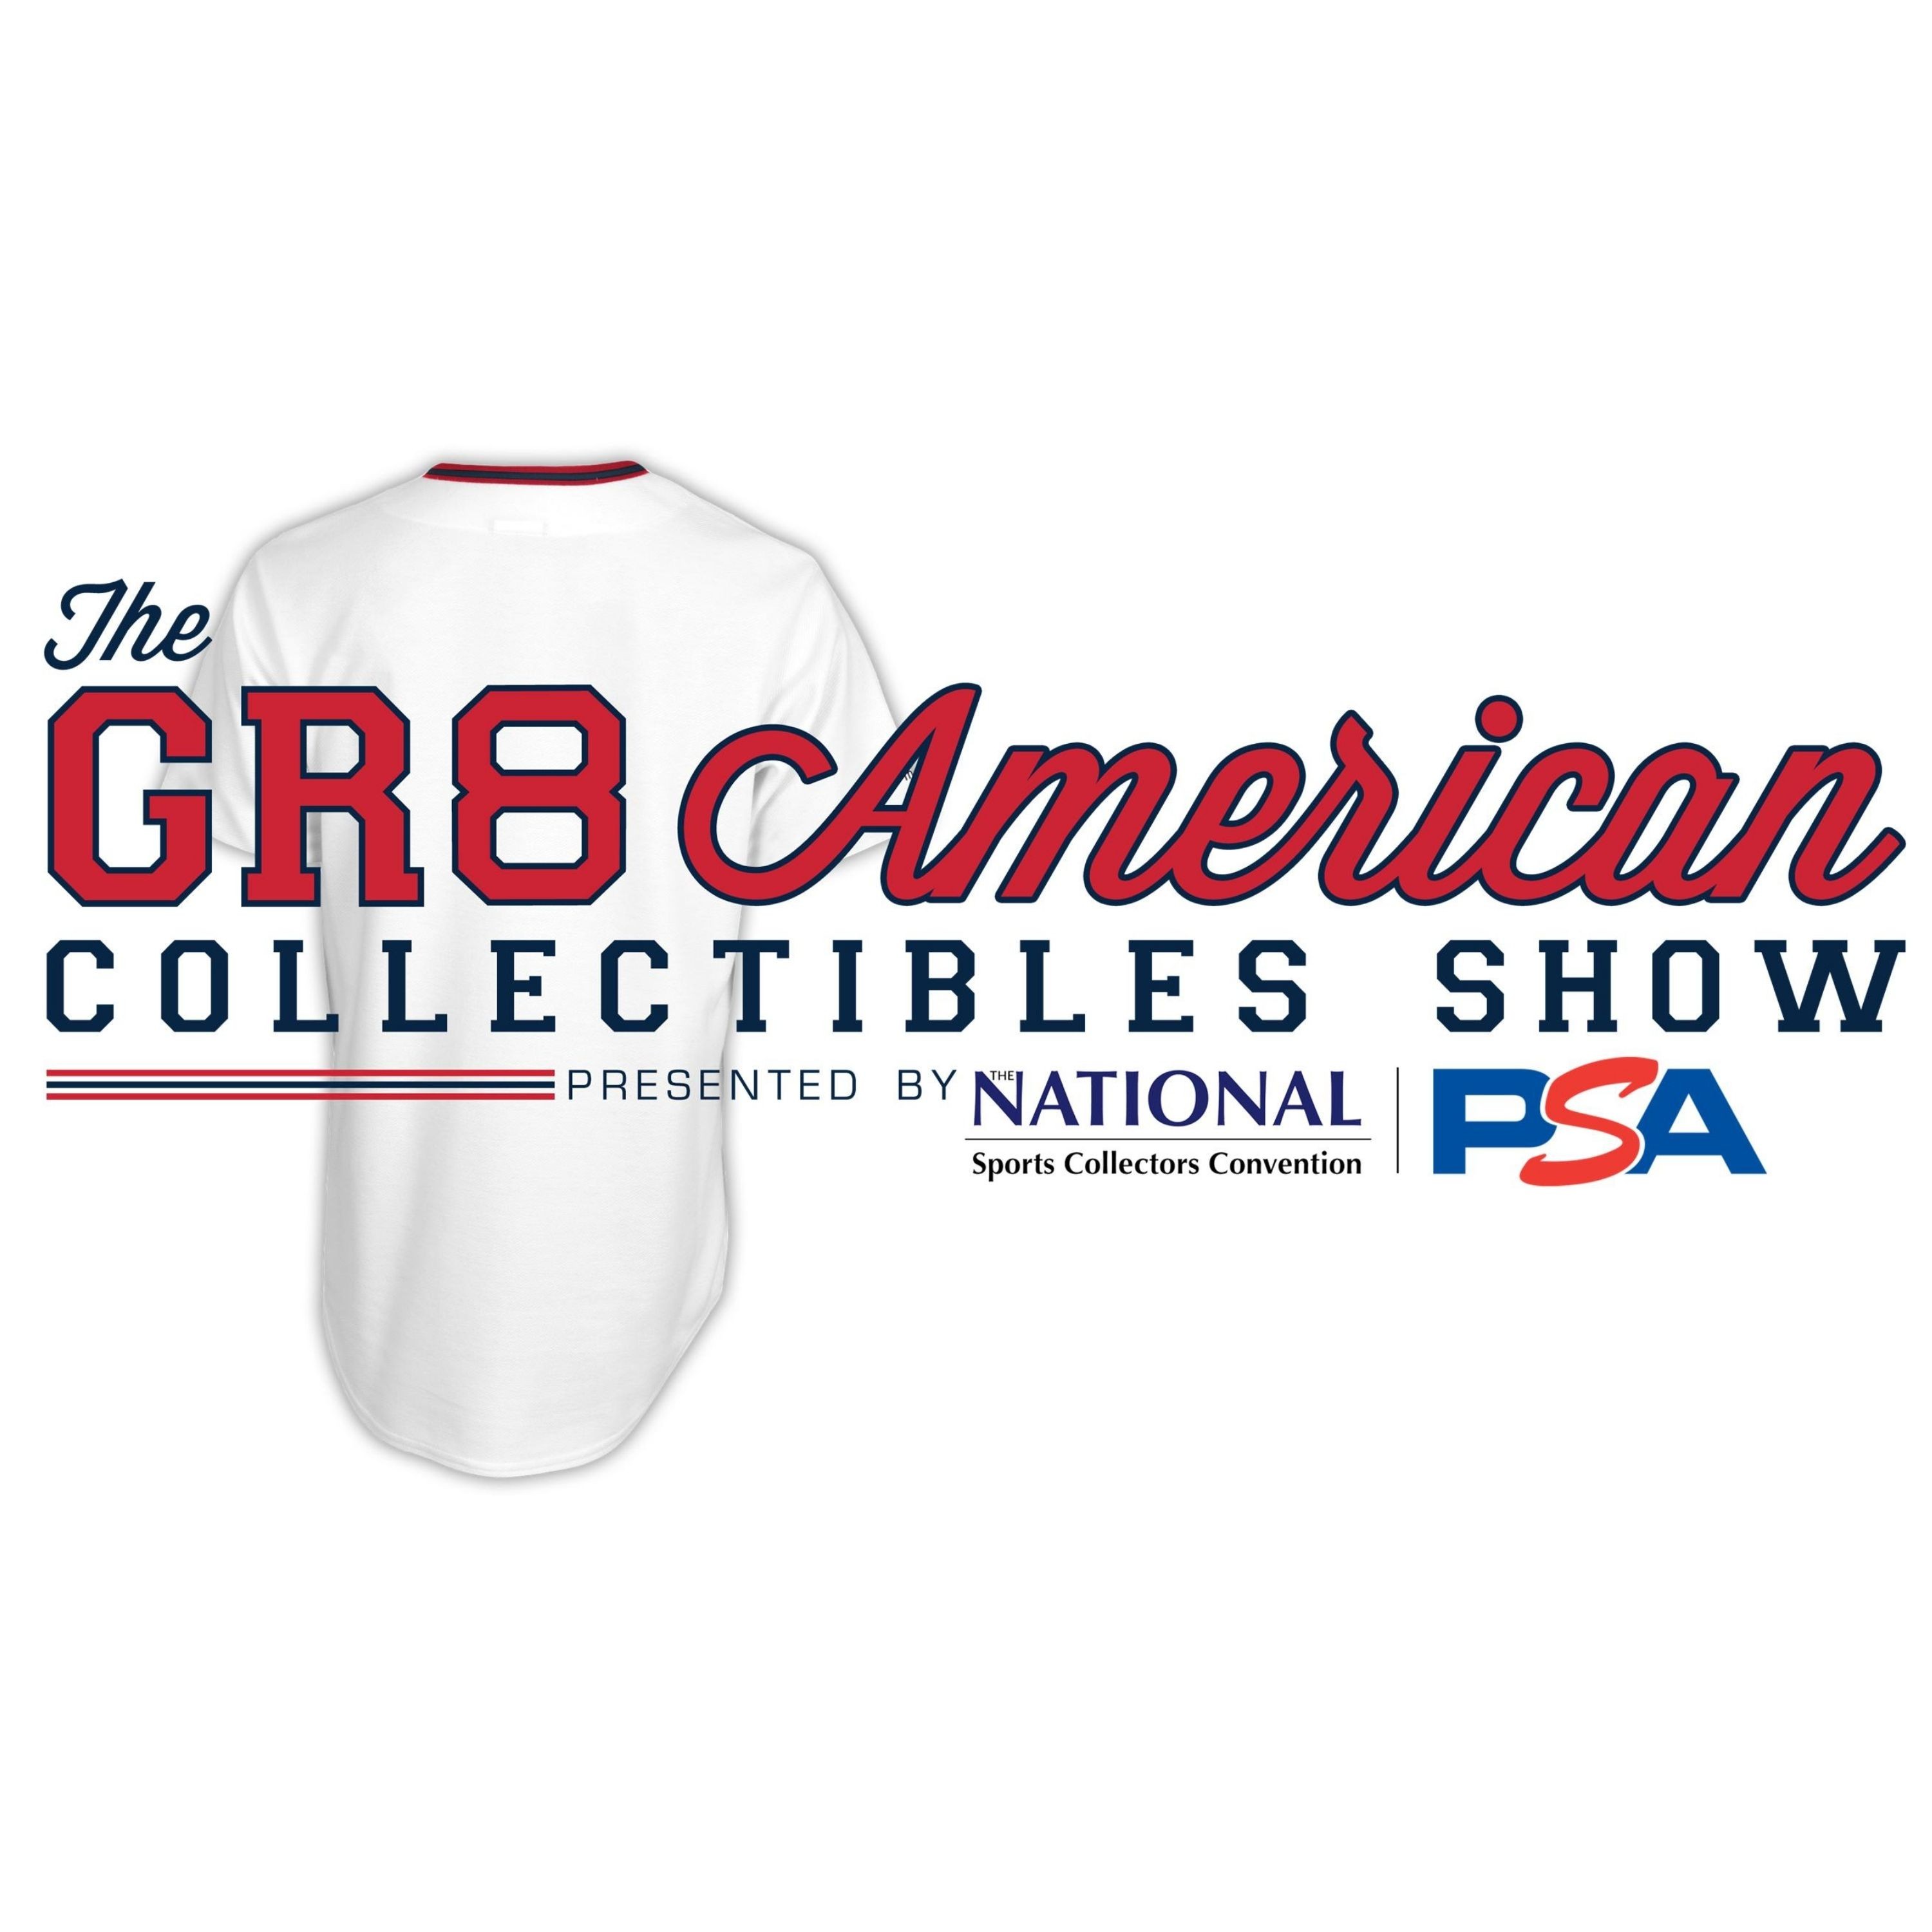 The Great American Collectables Show